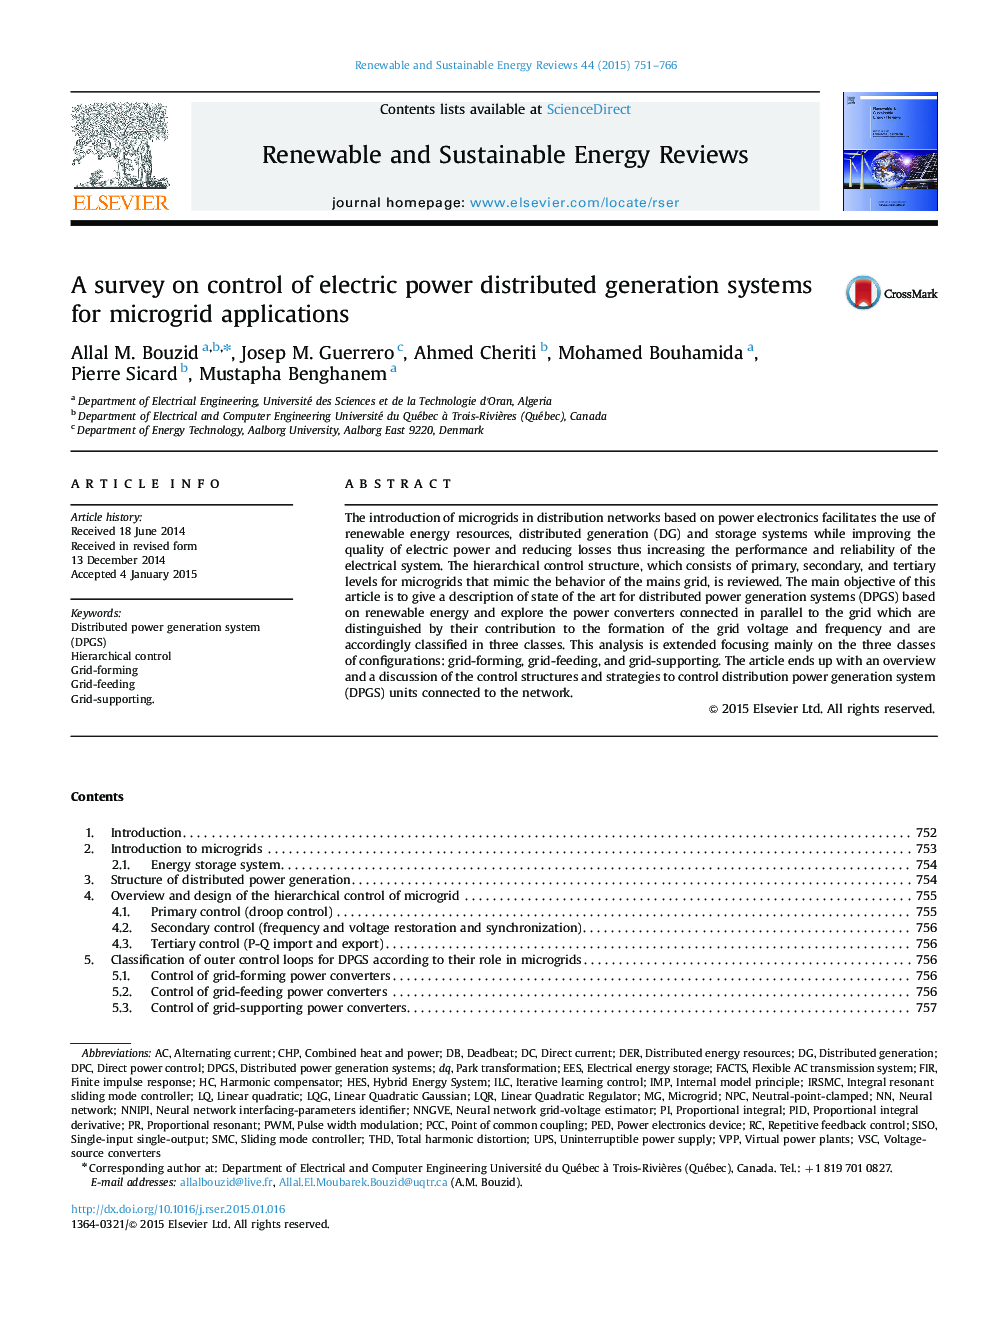 A survey on control of electric power distributed generation systems for microgrid applications